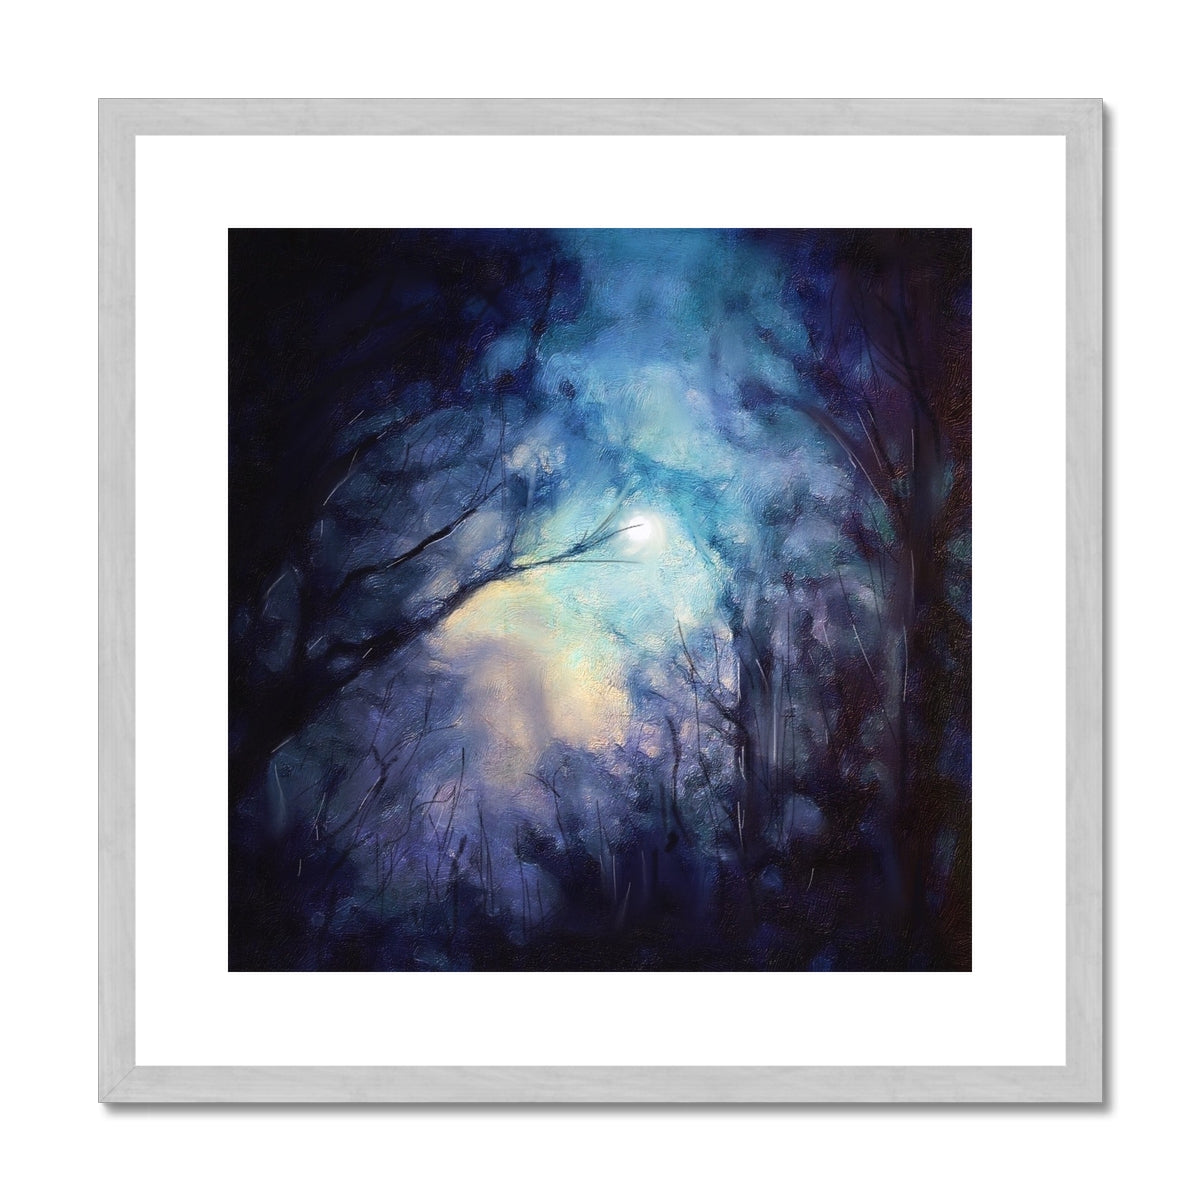 A Moonlit Highland Wood Painting | Antique Framed & Mounted Prints From Scotland-Antique Framed & Mounted Prints-Scottish Highlands & Lowlands Art Gallery-20"x20"-Silver Frame-Paintings, Prints, Homeware, Art Gifts From Scotland By Scottish Artist Kevin Hunter